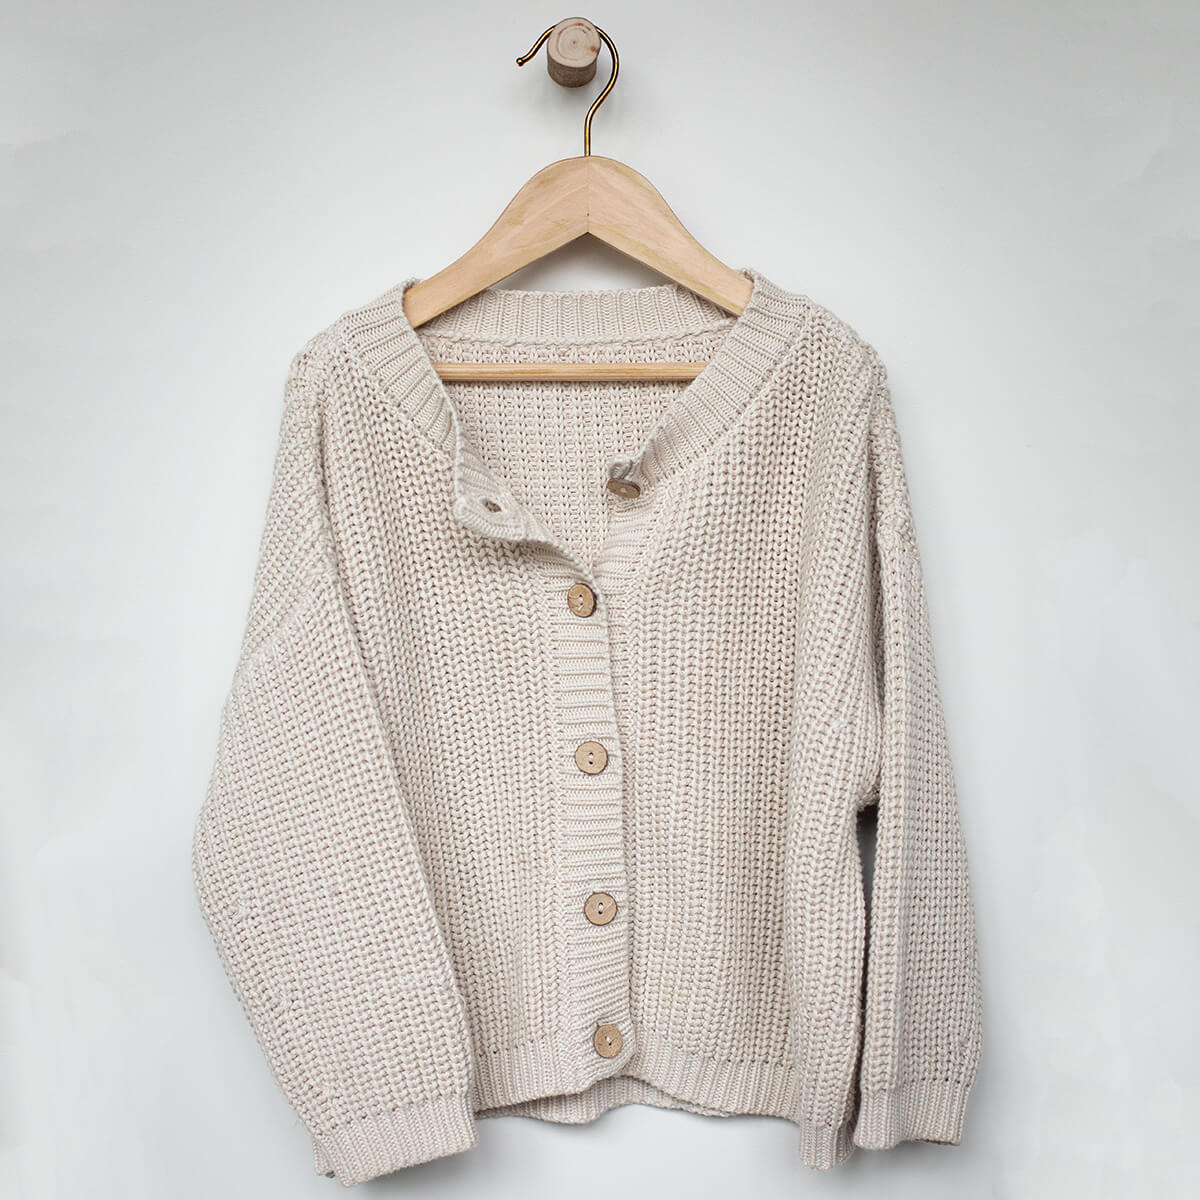 The Chunky Cardigan in Oatmeal by The Simple Folk – Junior Edition